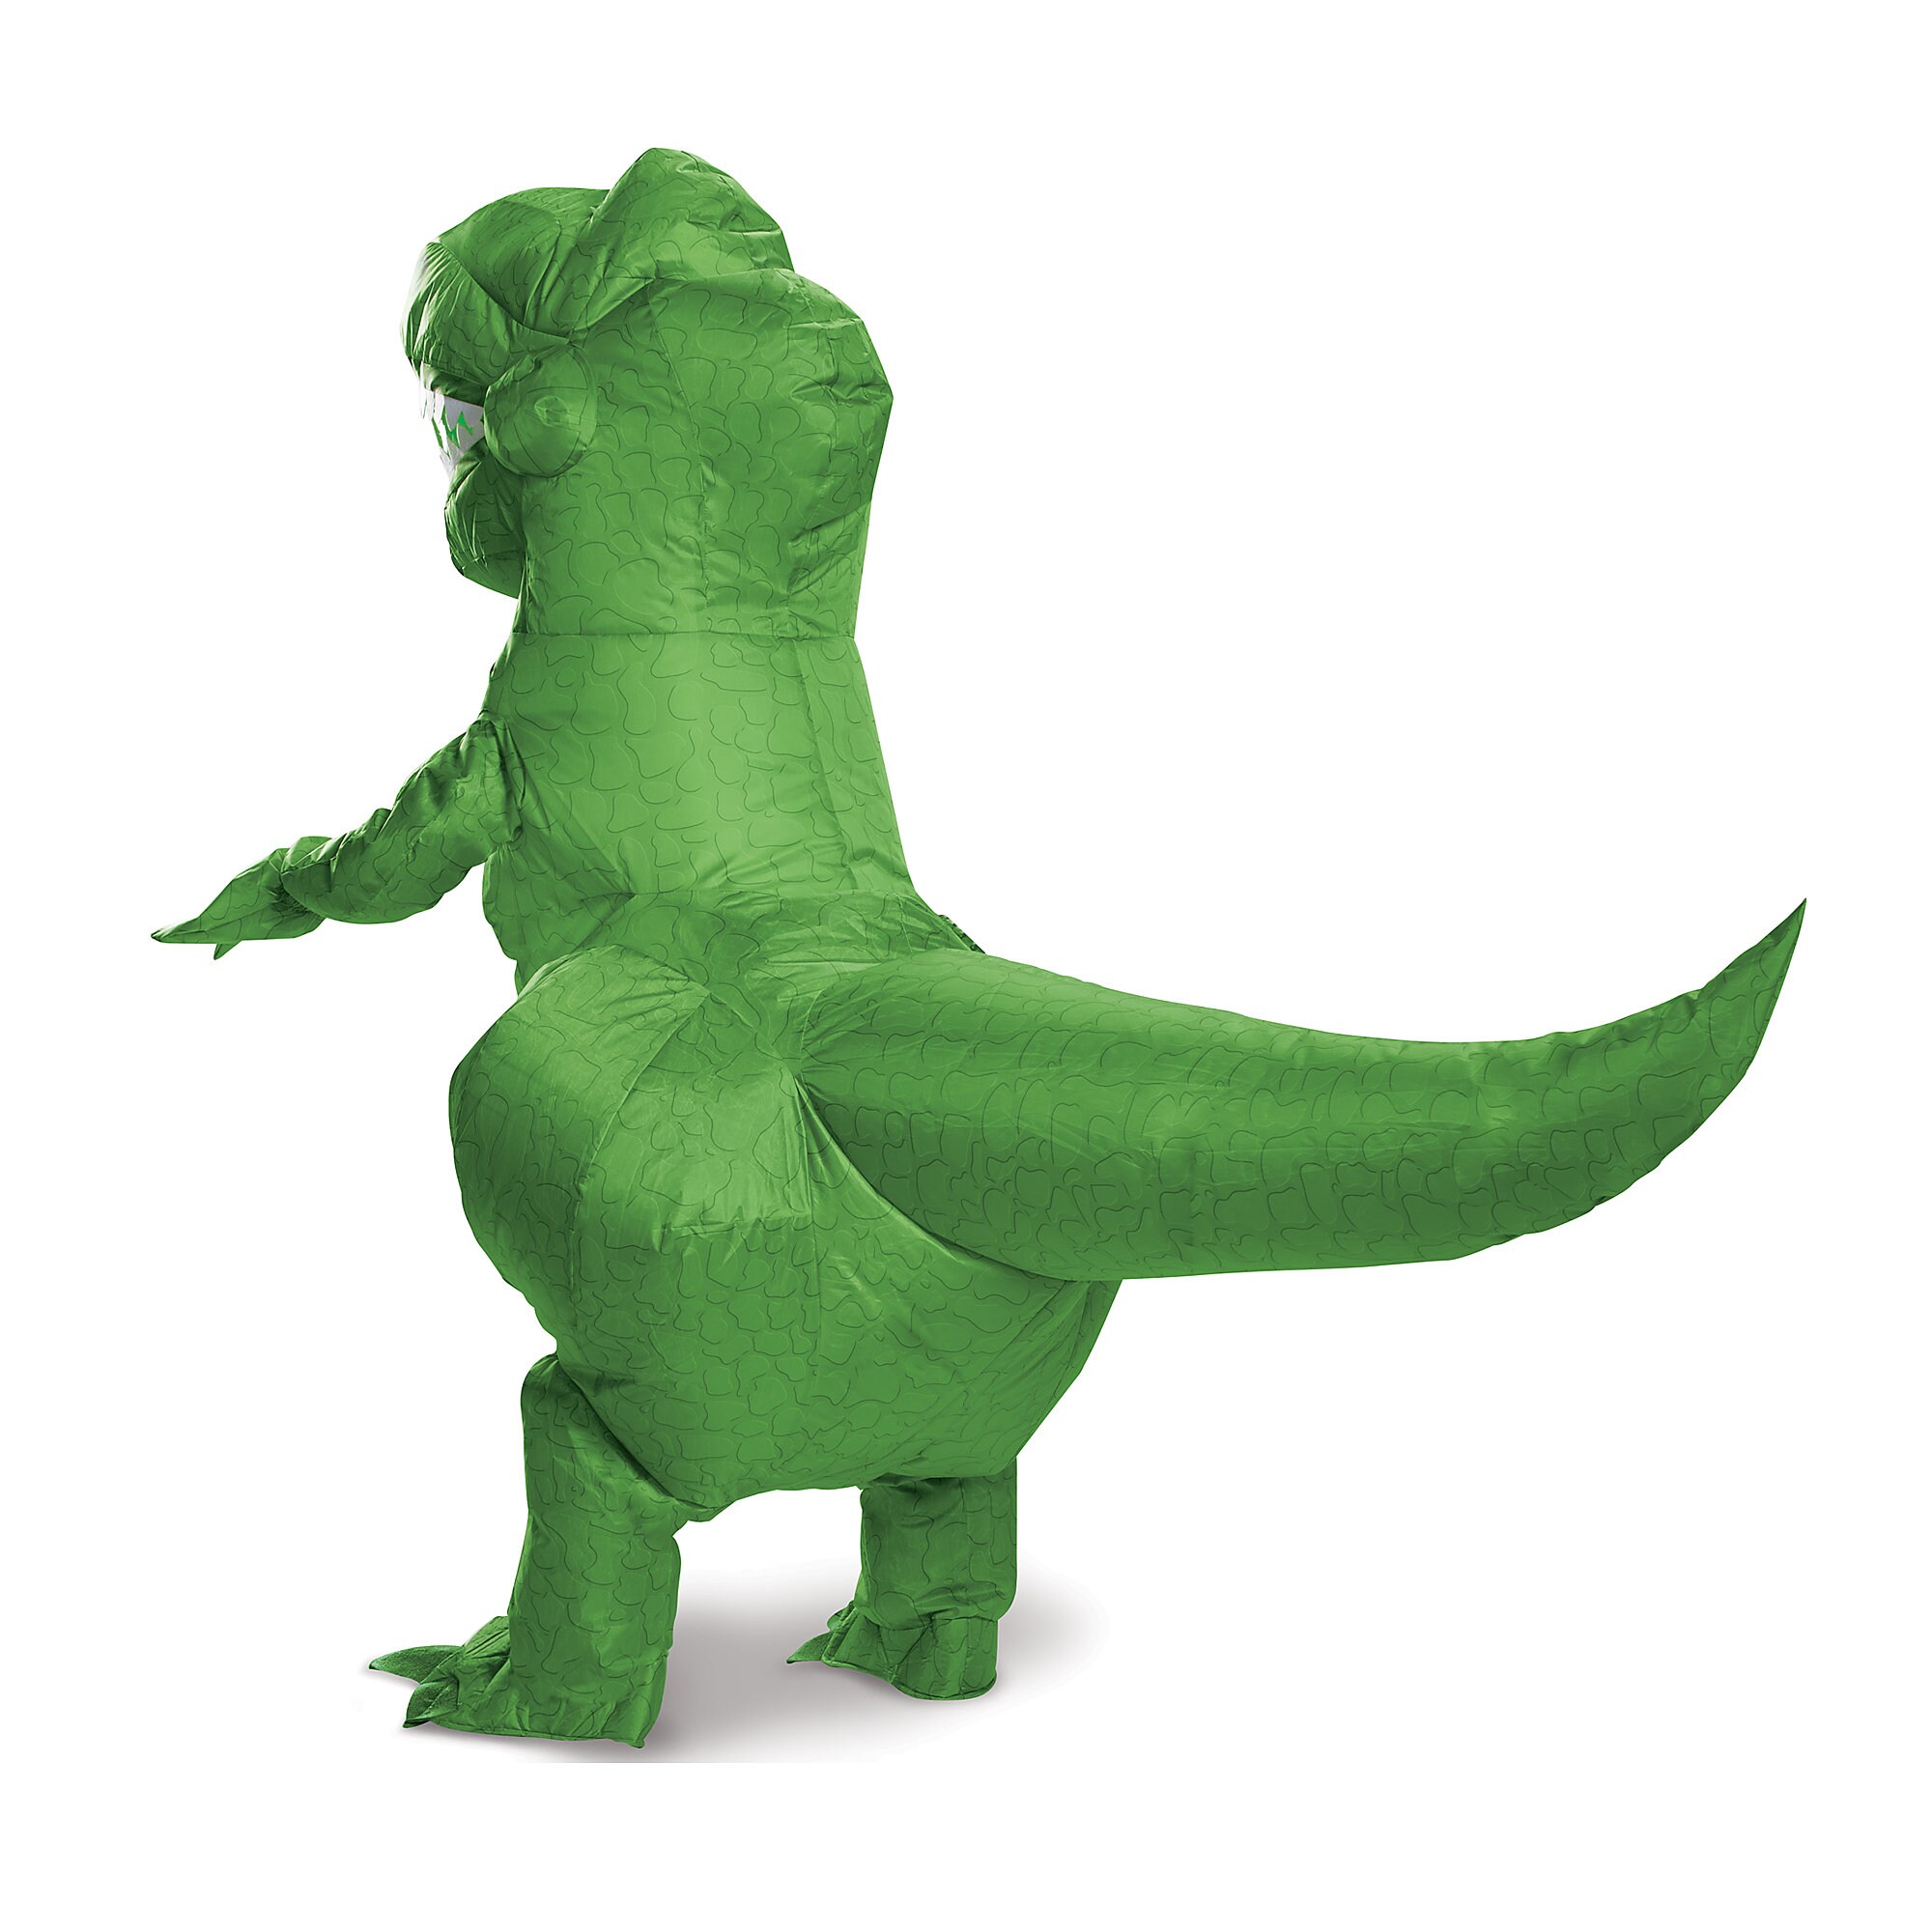 Rex Inflatable Costume for Kids by Disguise - Toy Story